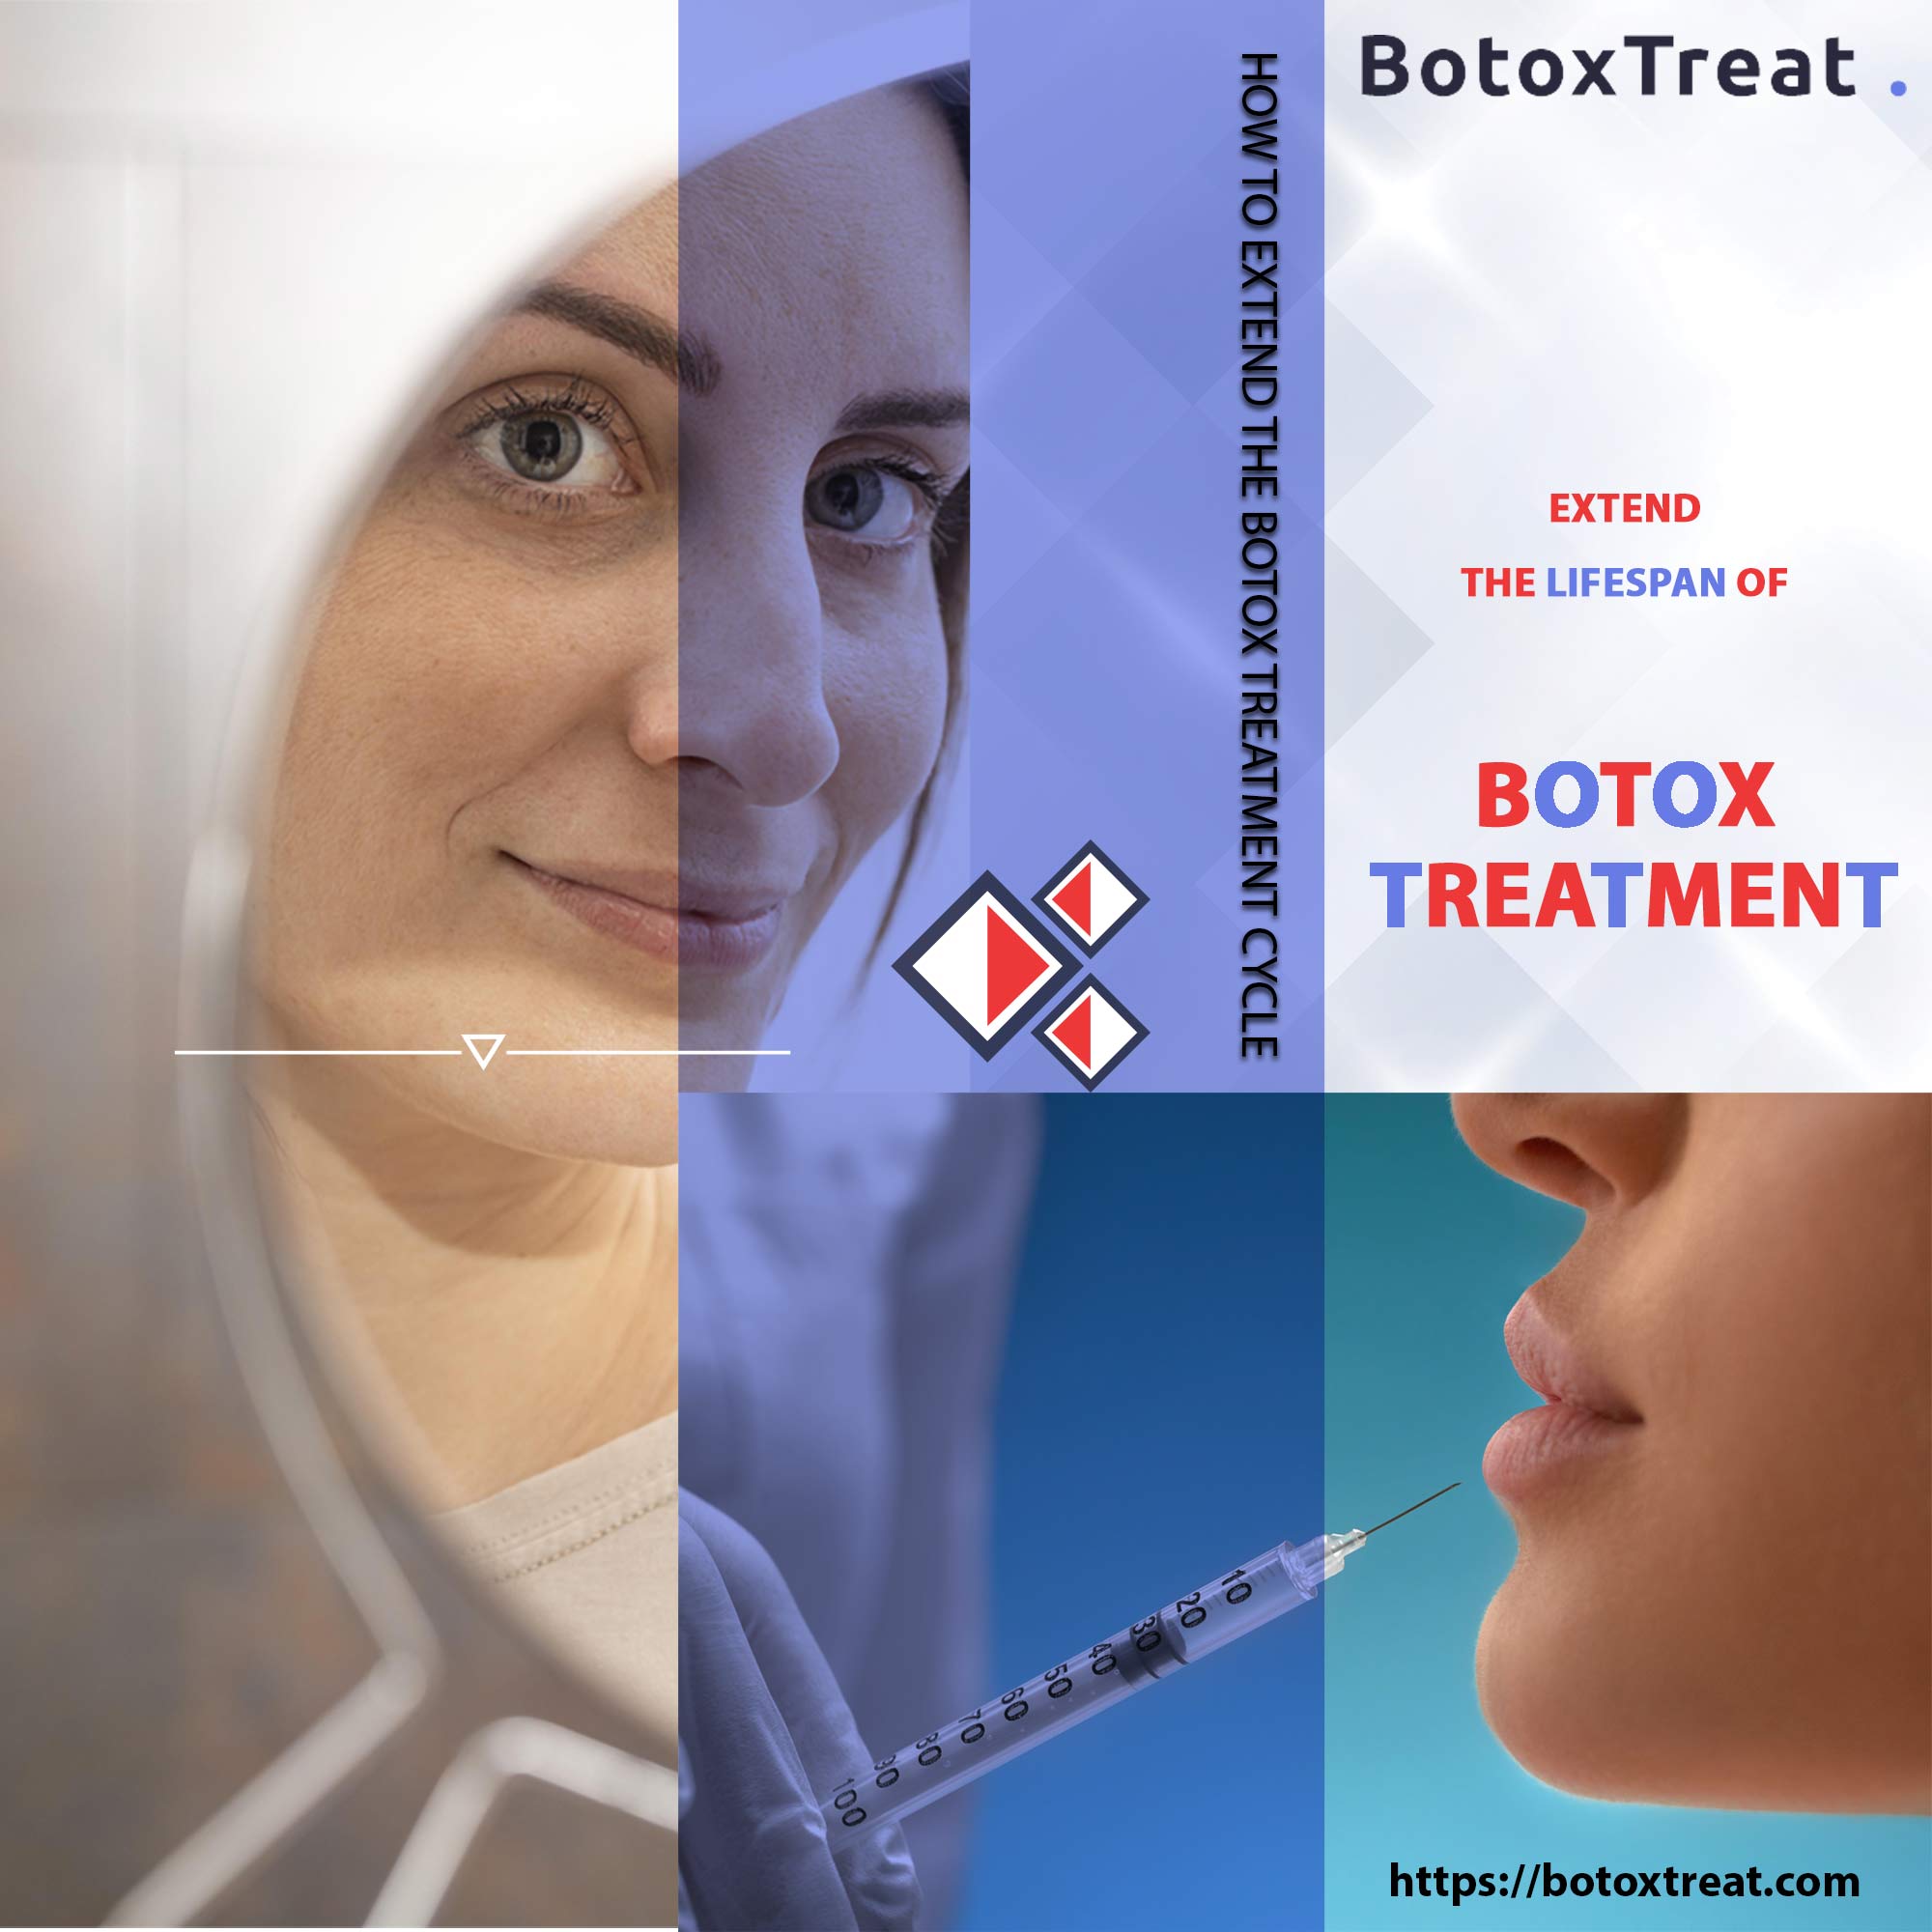 Image of a woman receiving a Botox treatment from a dermatologist in a medical setting. The image is relevant to the article about extending the lifespan of your Botox treatment. BotoxTreat app